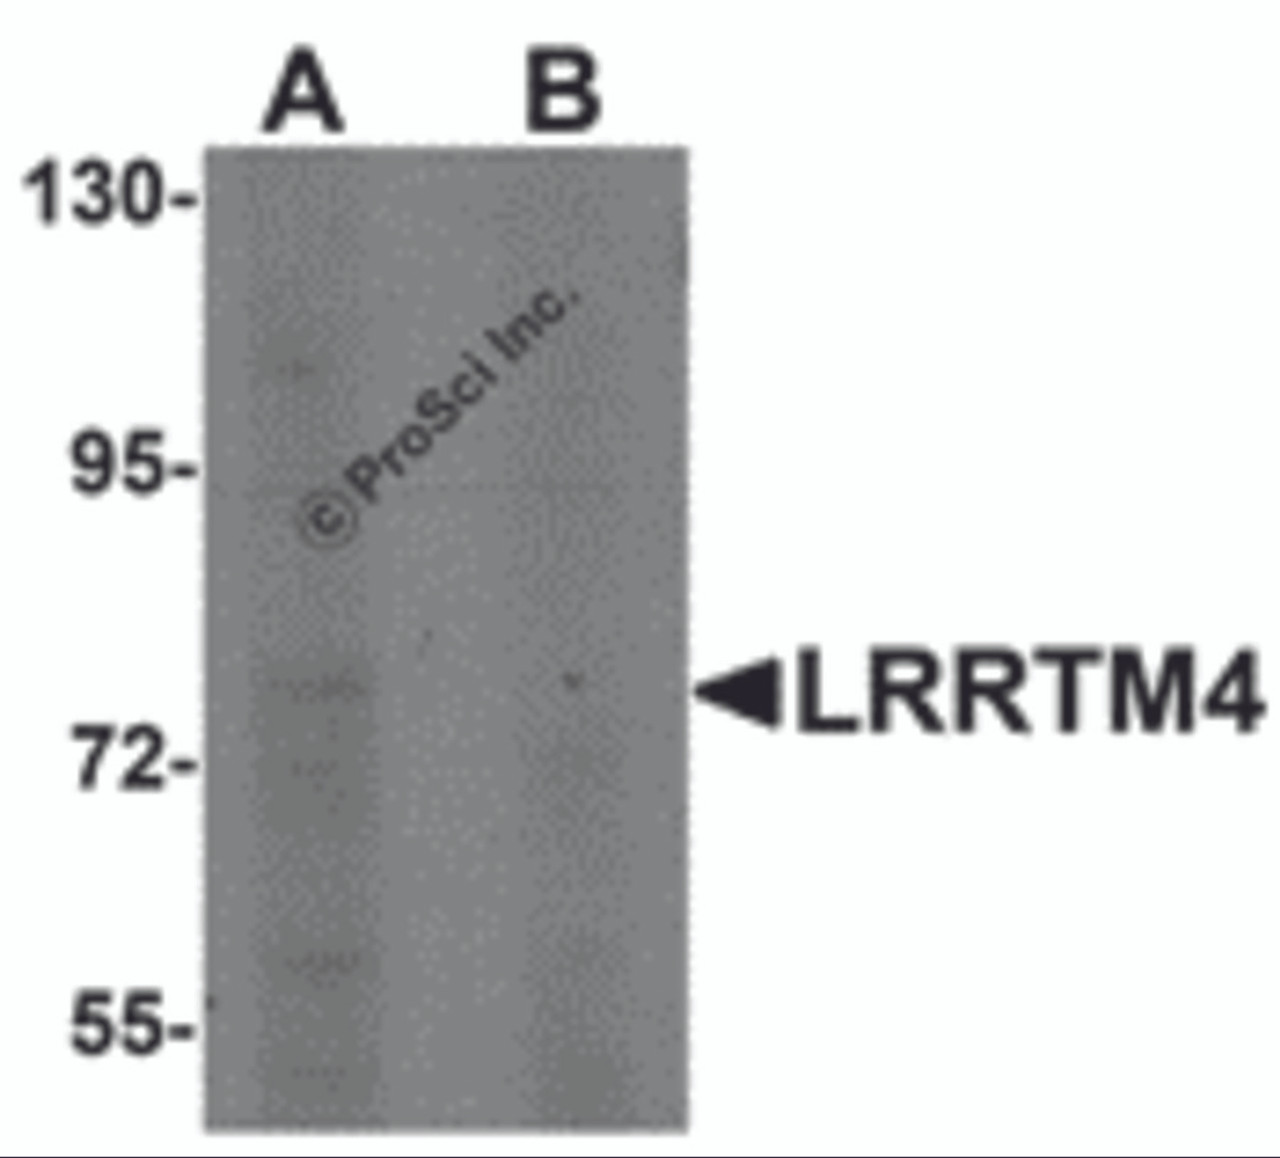 Western blot analysis of LRRTM4 in HeLa cell lysate with LRRTM4 antibody at 1 &#956;g/mL in (A) the absence and (B) the presence of blocking peptide.